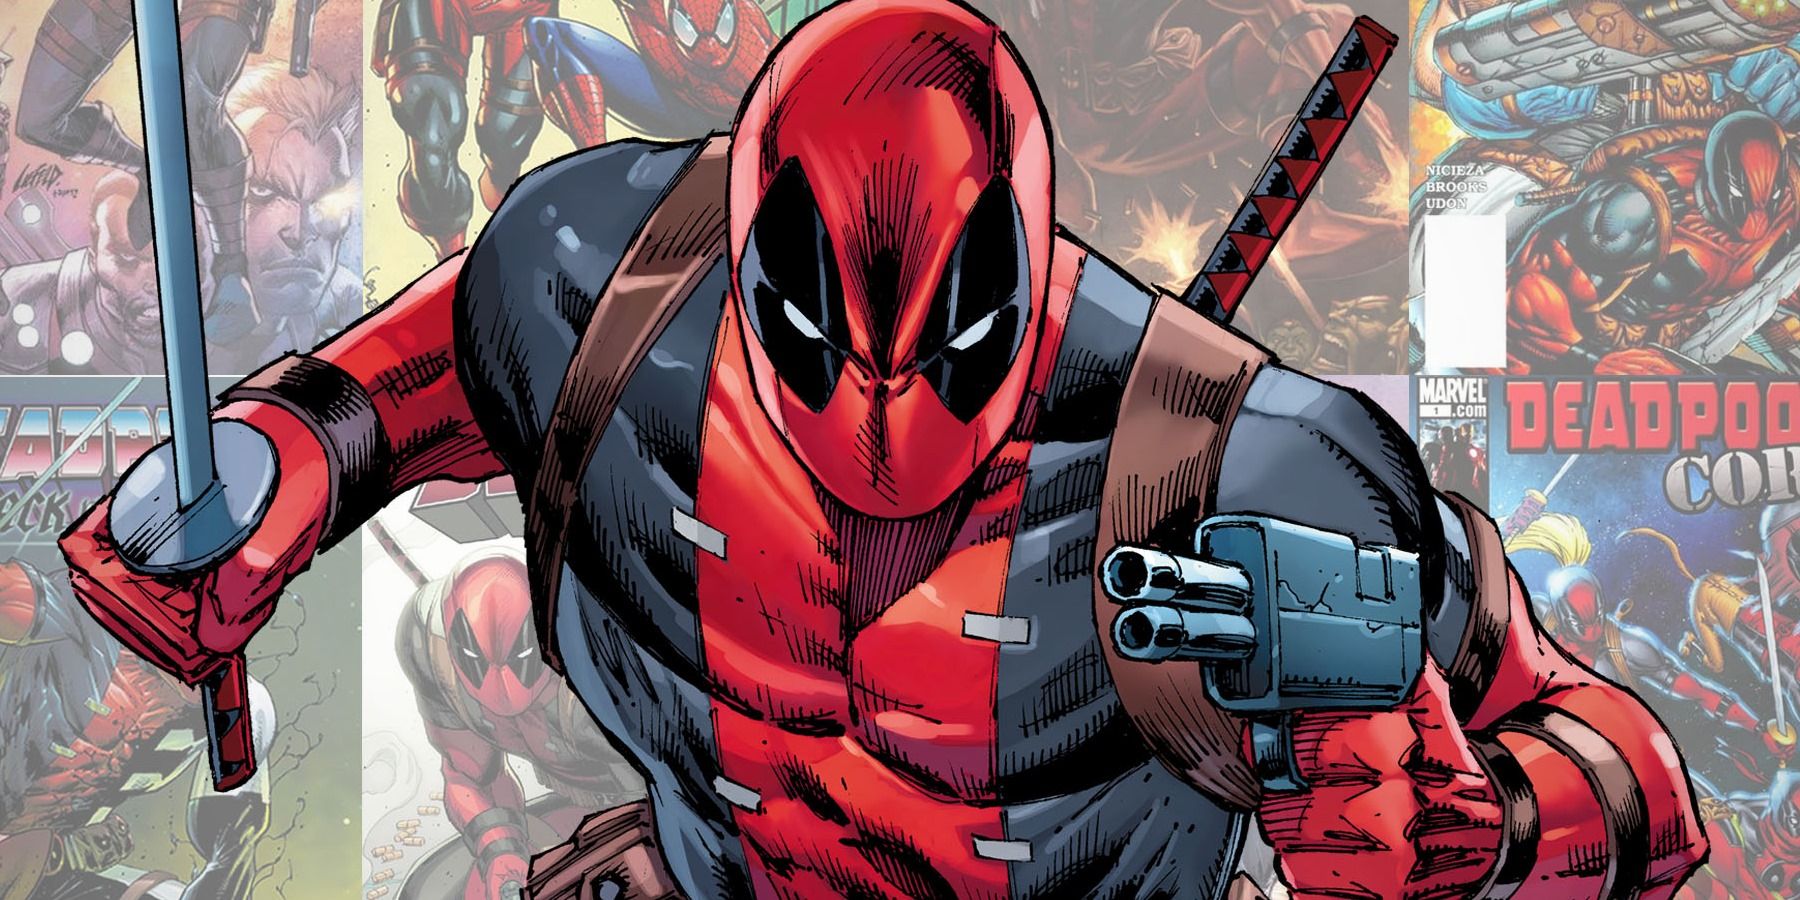 An image of Deadpool preparing to attack on the comic cover